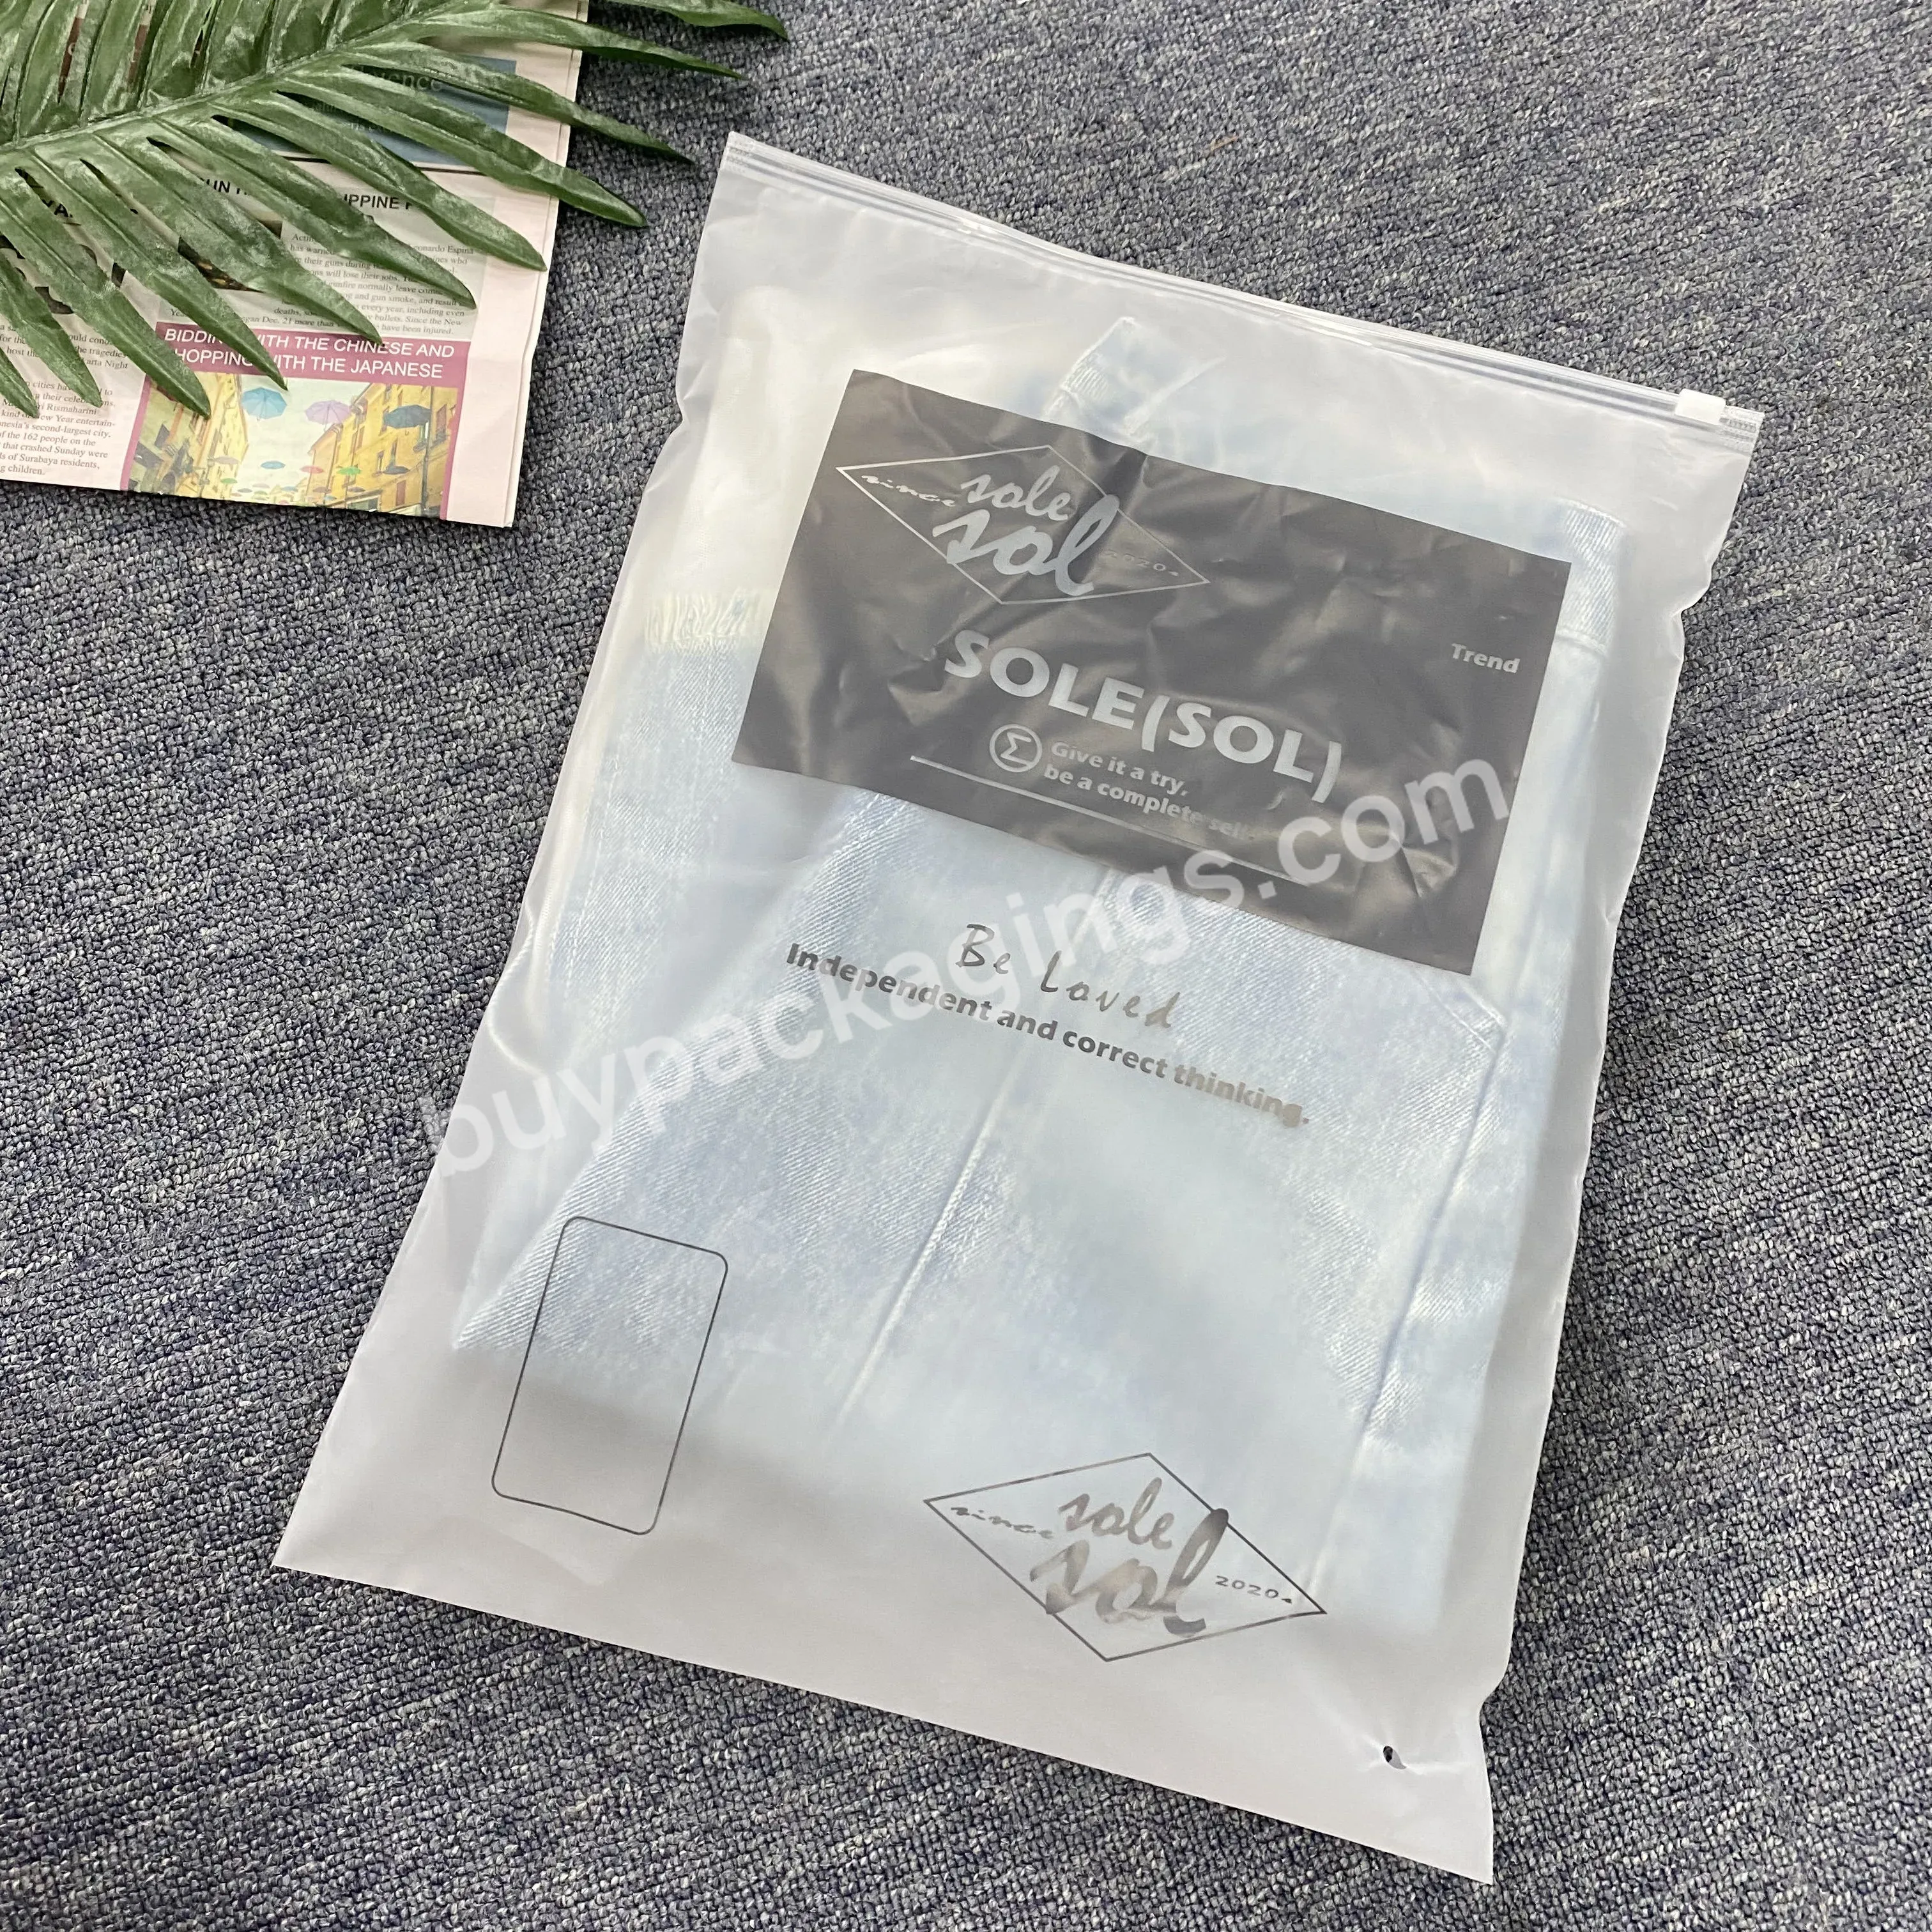 China Wholesale 2023 New Design Frosted Zipper Bag With Brand Custom Size Logo Print Recyclable Waterproof Shipping Packaging - Buy New Design Frosted Zipper Bag With Brand,Custom Size Logo Print,Recyclable Waterproof Shipping Packaging.